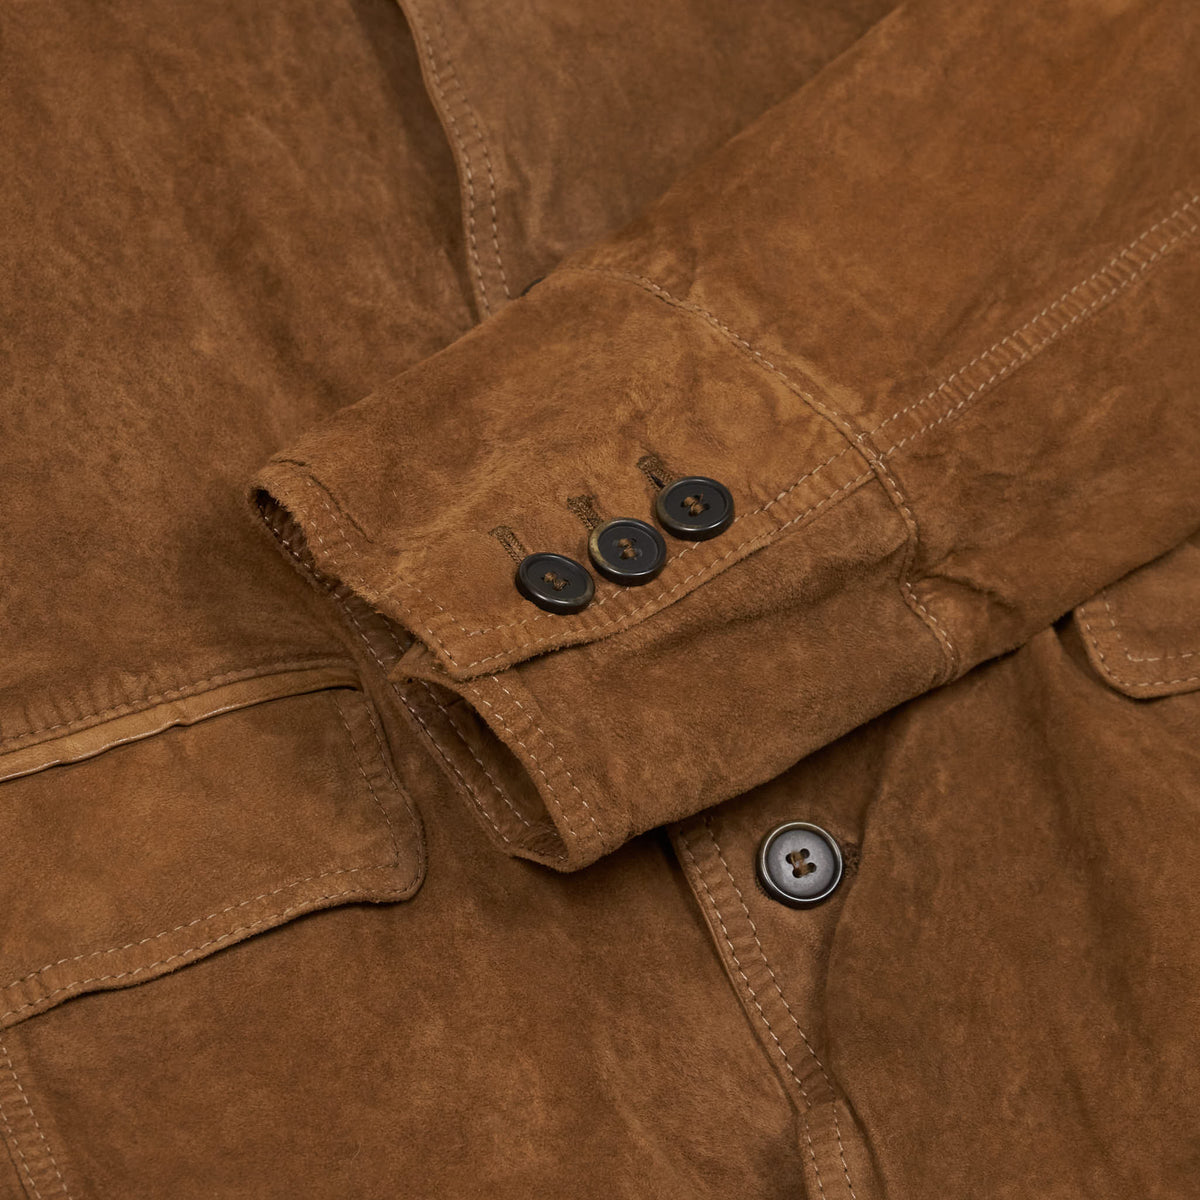 Gimo&#39;s Suede Mens Ranch Jacket